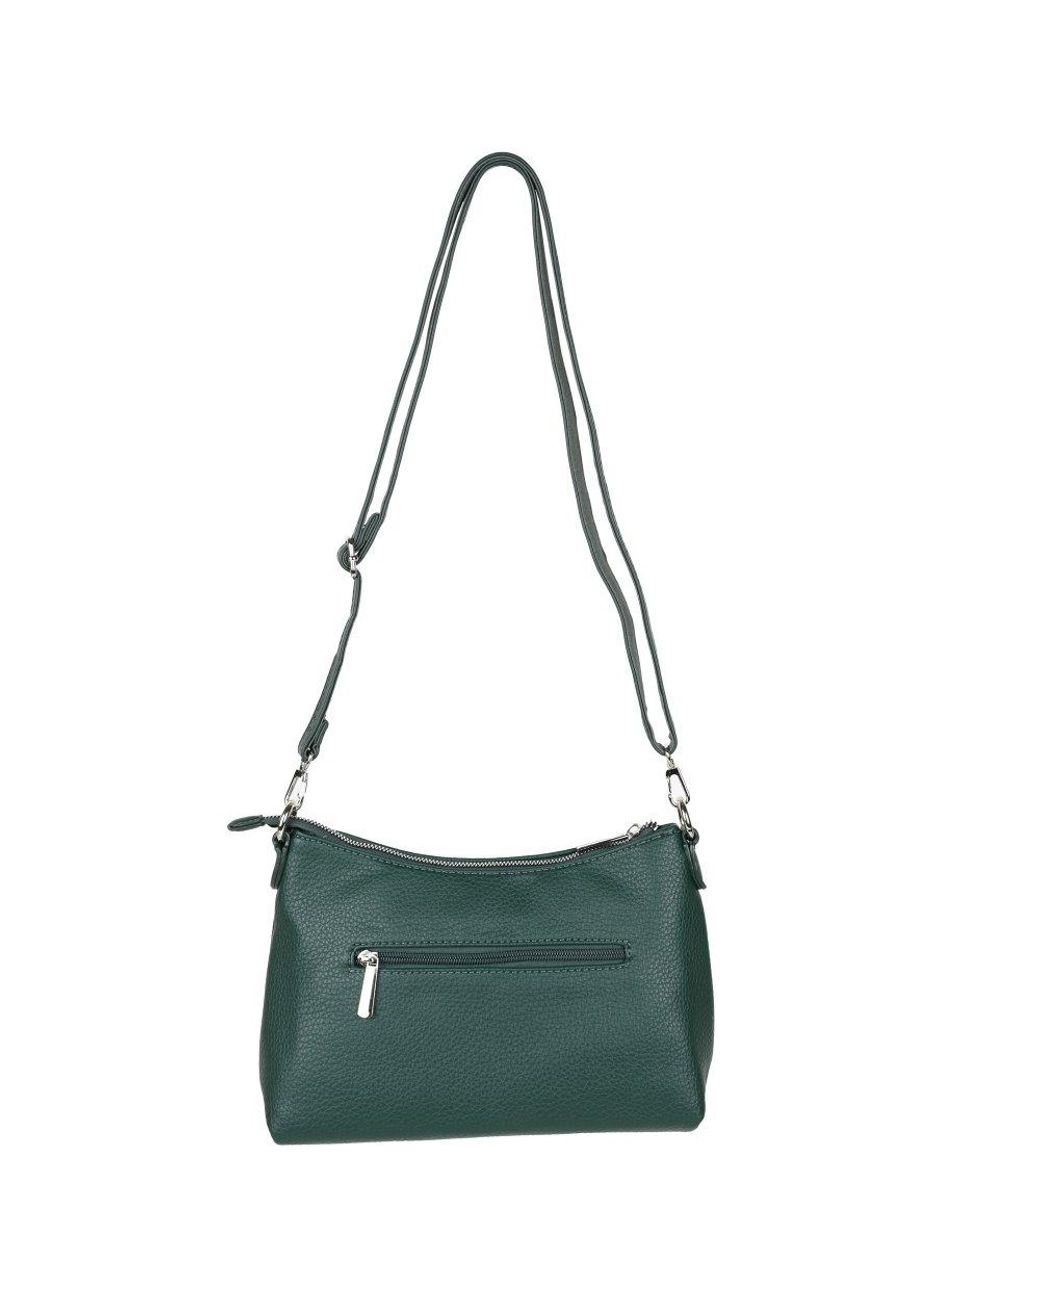 David Jones 5902-1 Green Tote Bag - Accessories from North Shoes UK